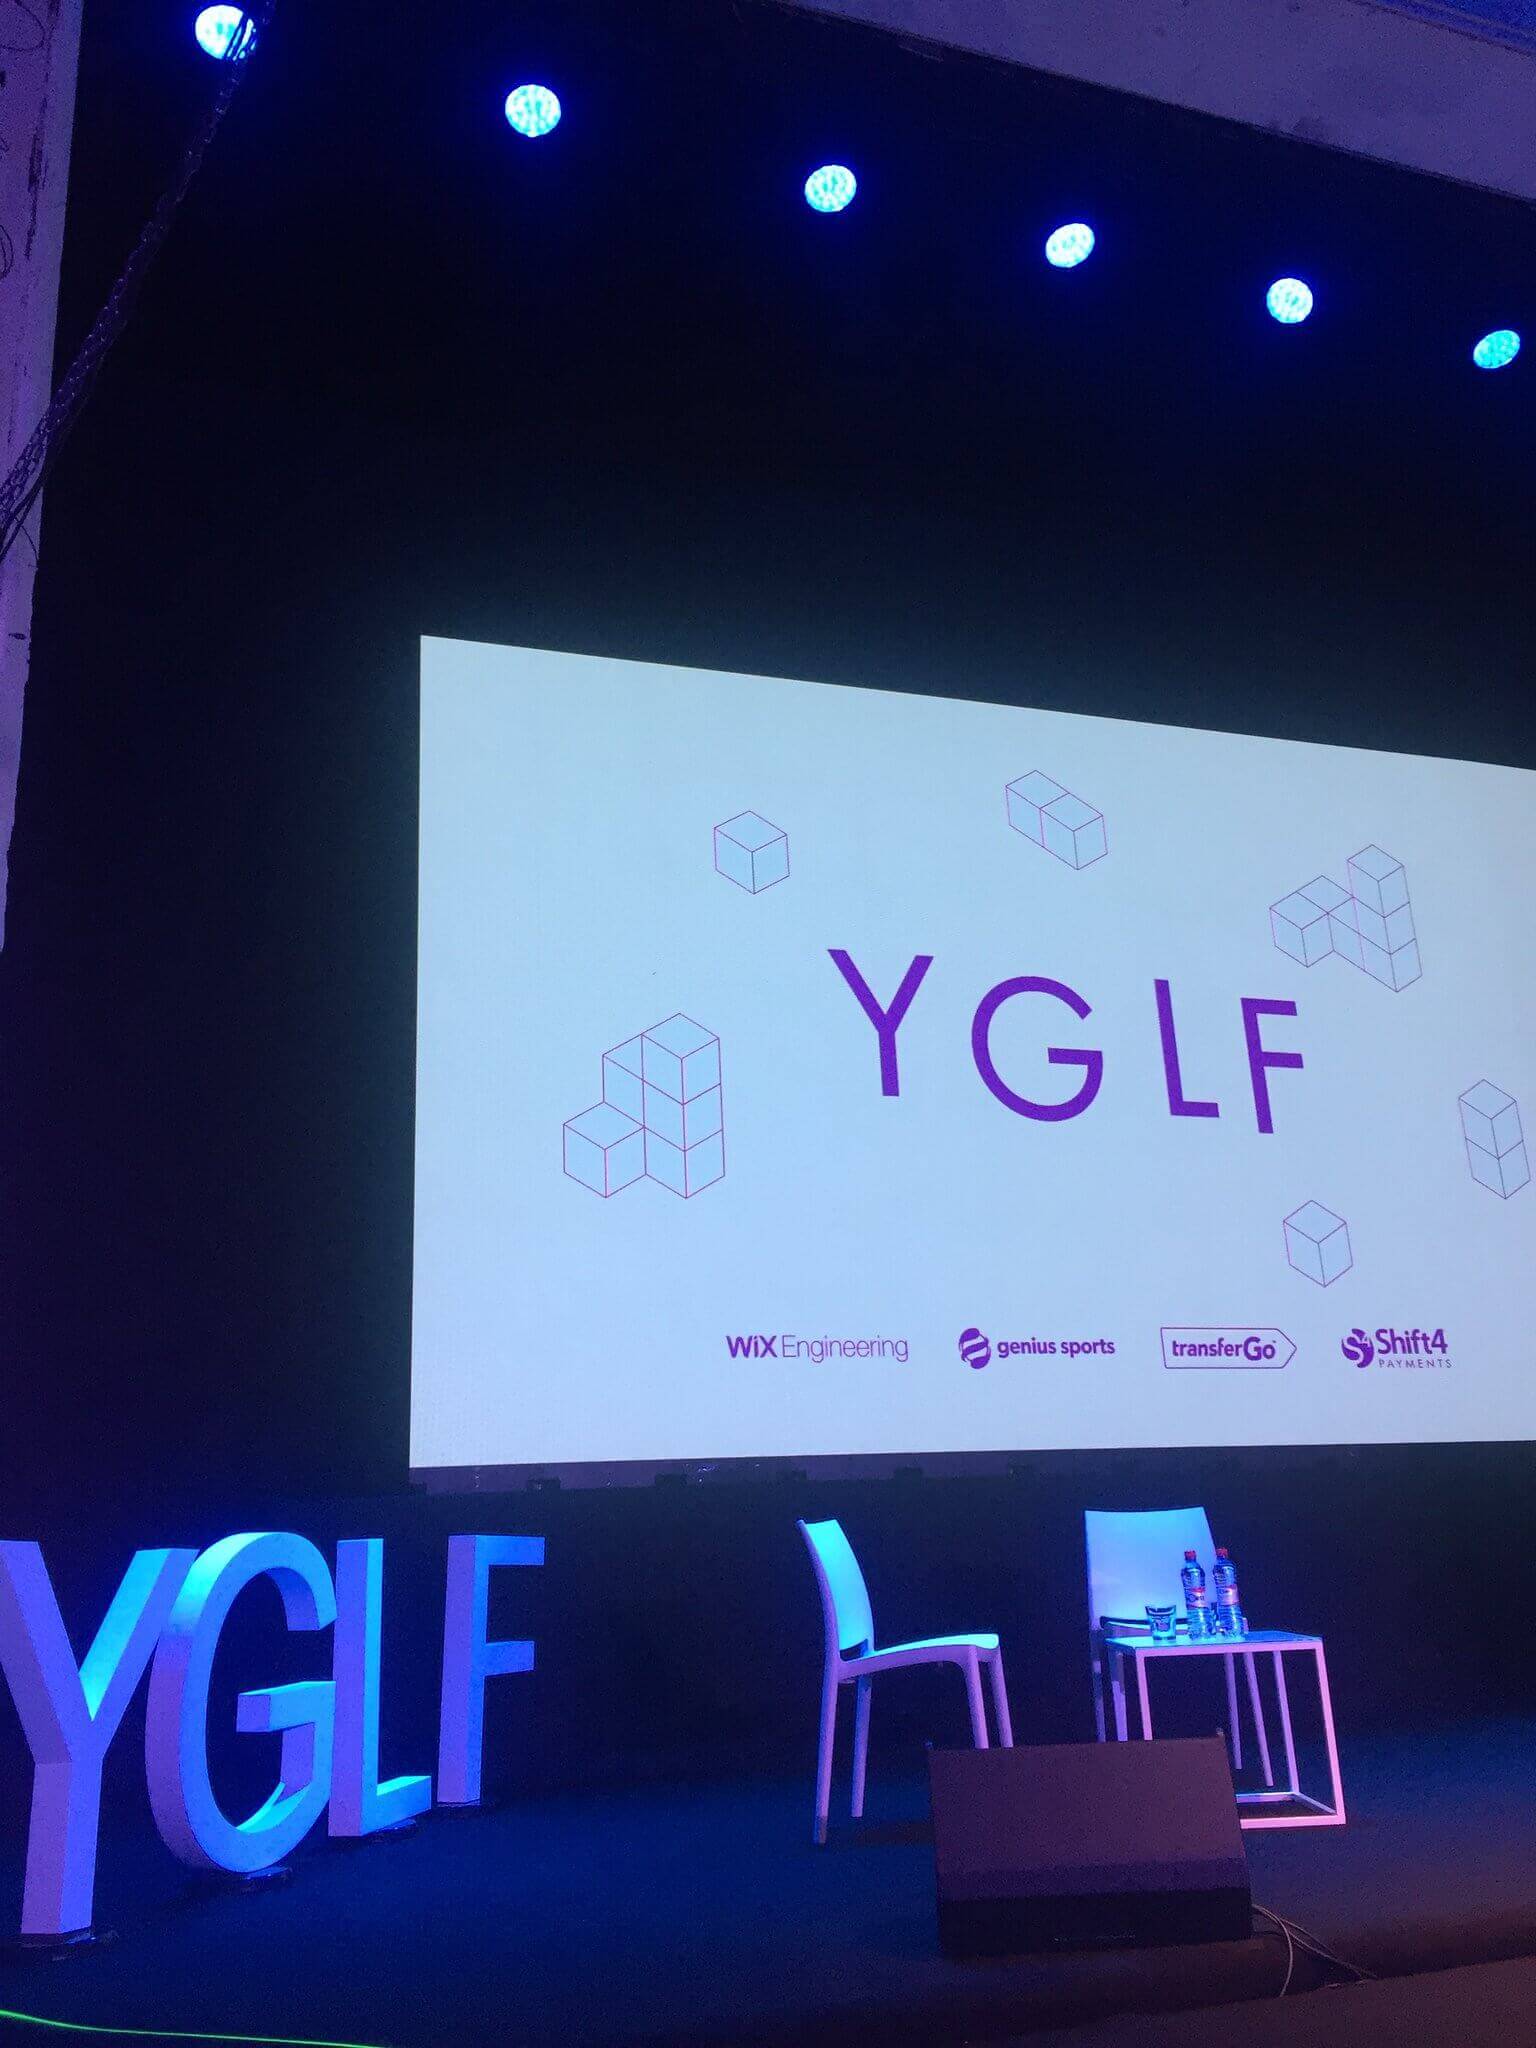 The YGLF placeholder slide used throughout the day.